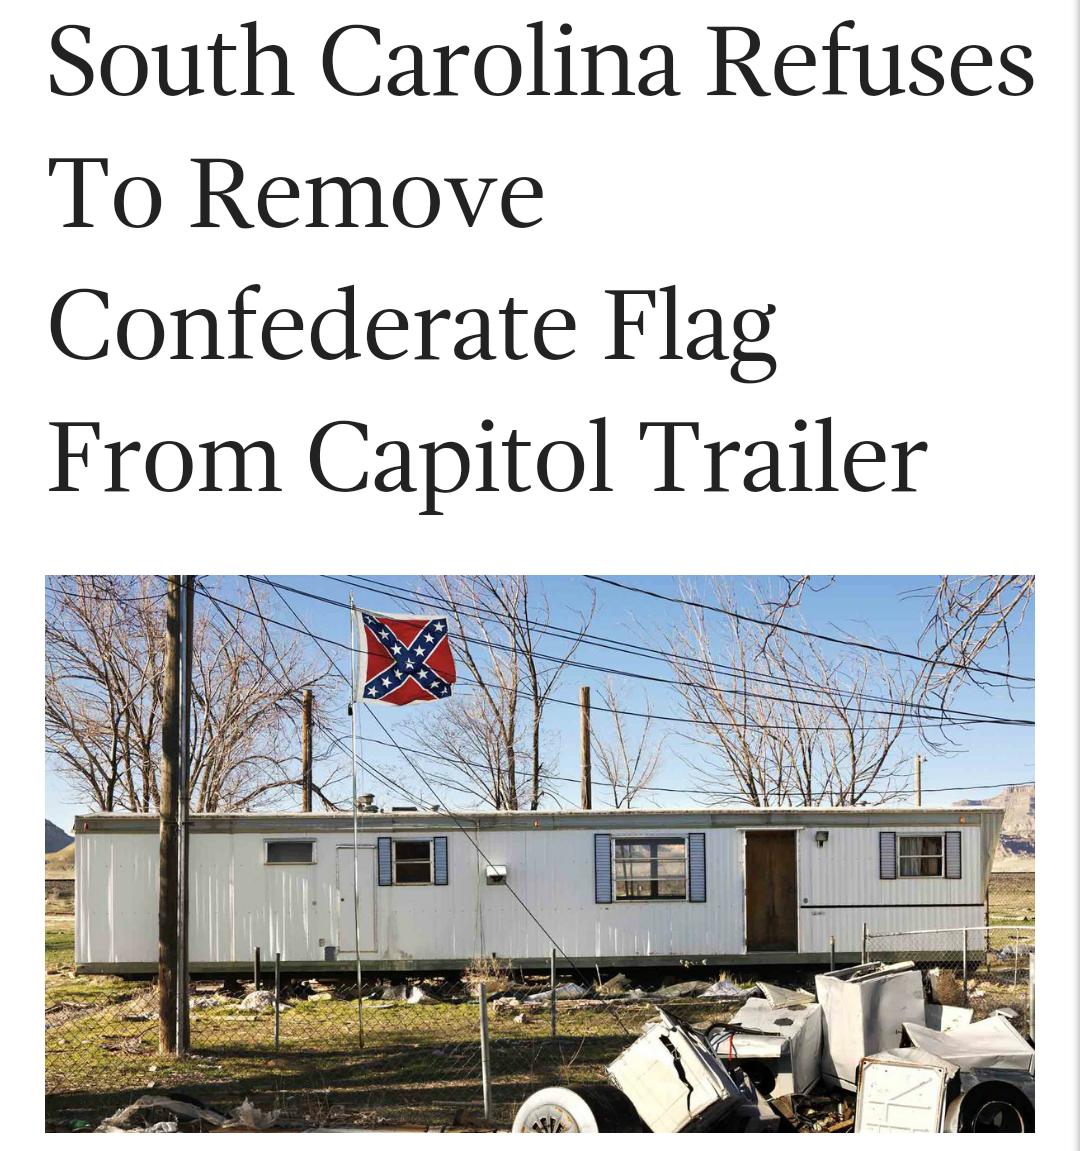 trailer with confederate flag - South Carolina Refuses To Remove Confederate Flag From Capitol Trailer >